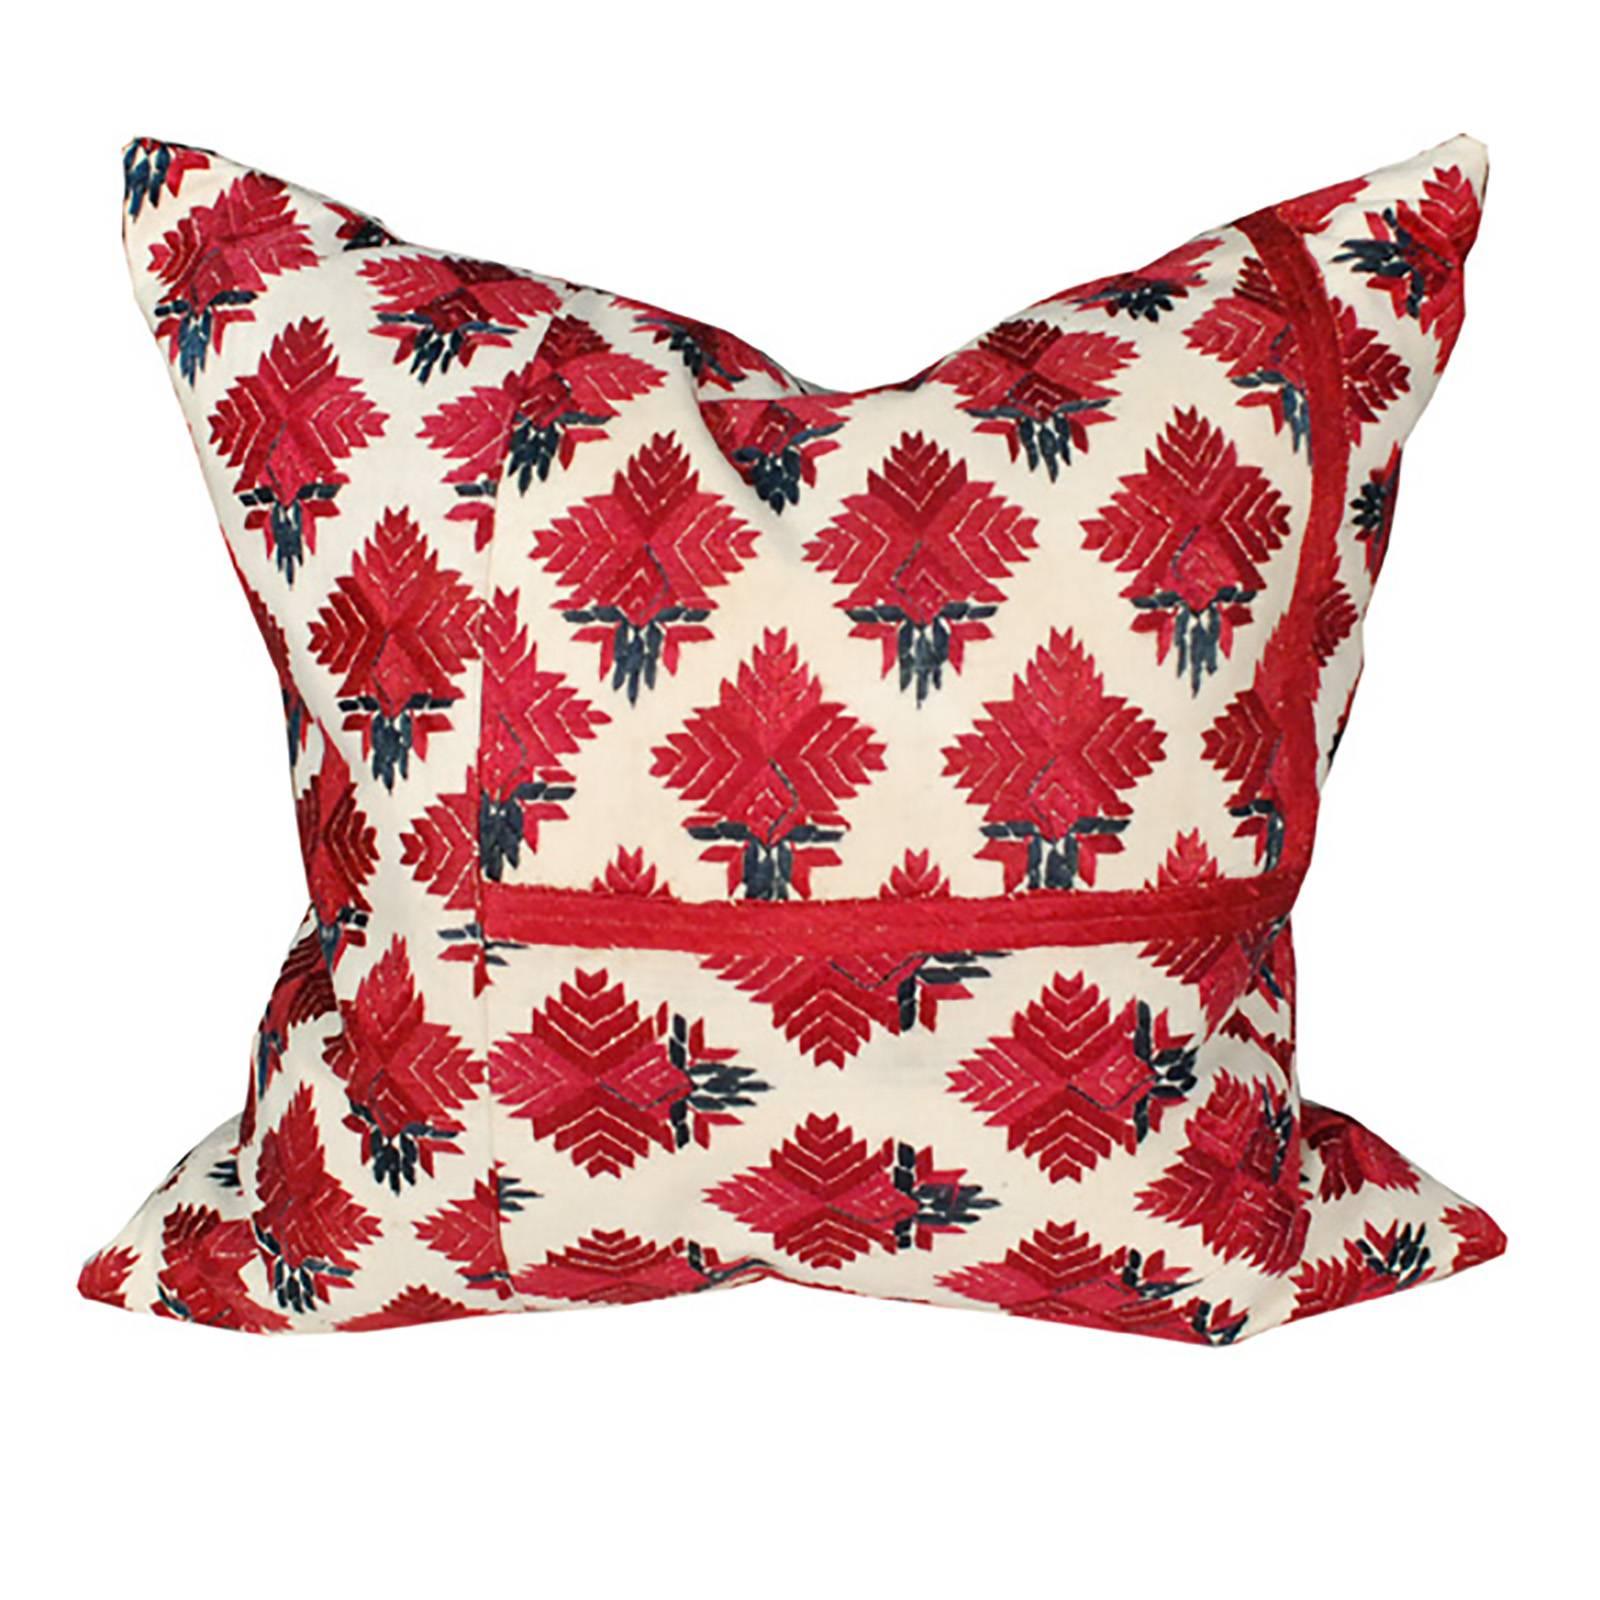 Red Throw Pillow with Vintage Indian Embroidery